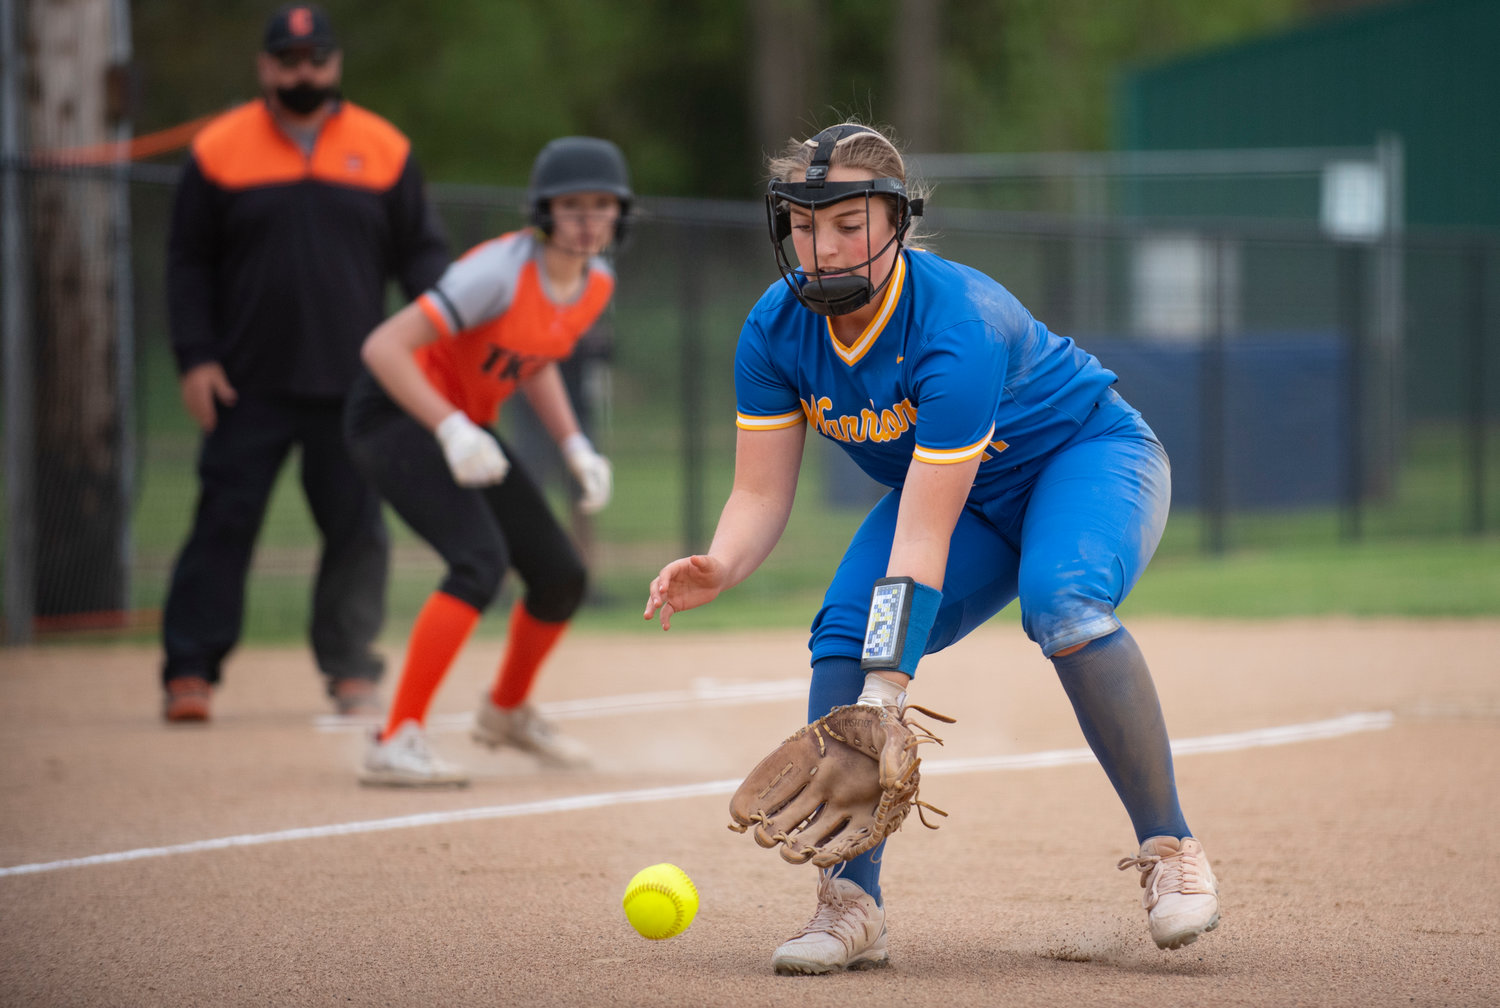 Rochester third baseman Callie Crawford fields a grounder with Centralia's Lauren Wasson behind her on the third base line.